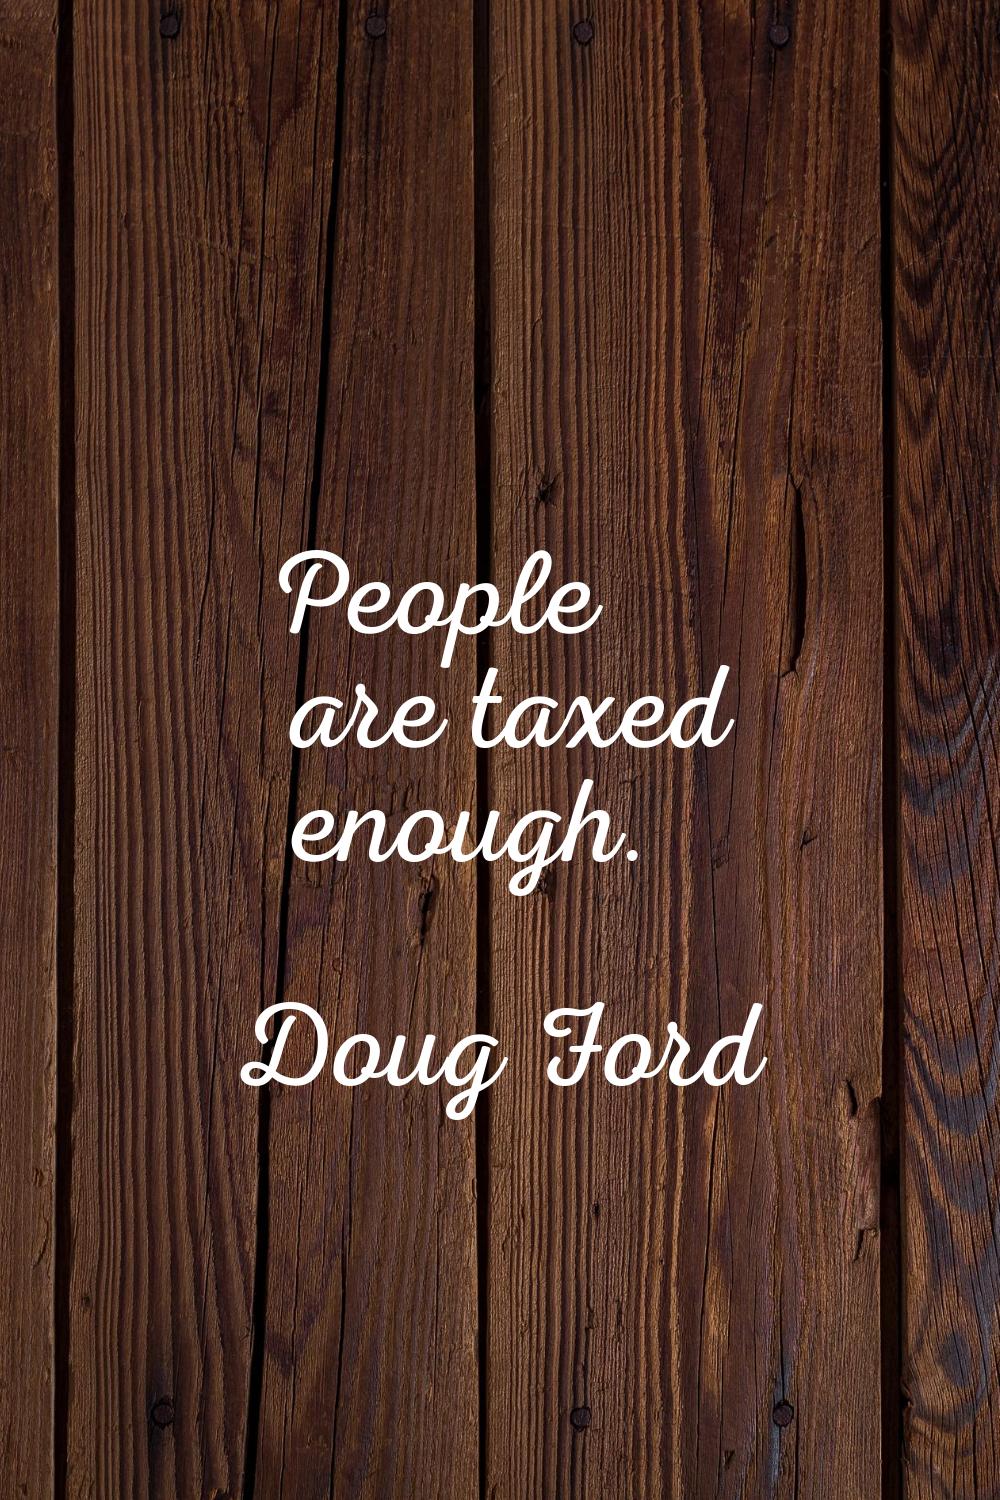 People are taxed enough.